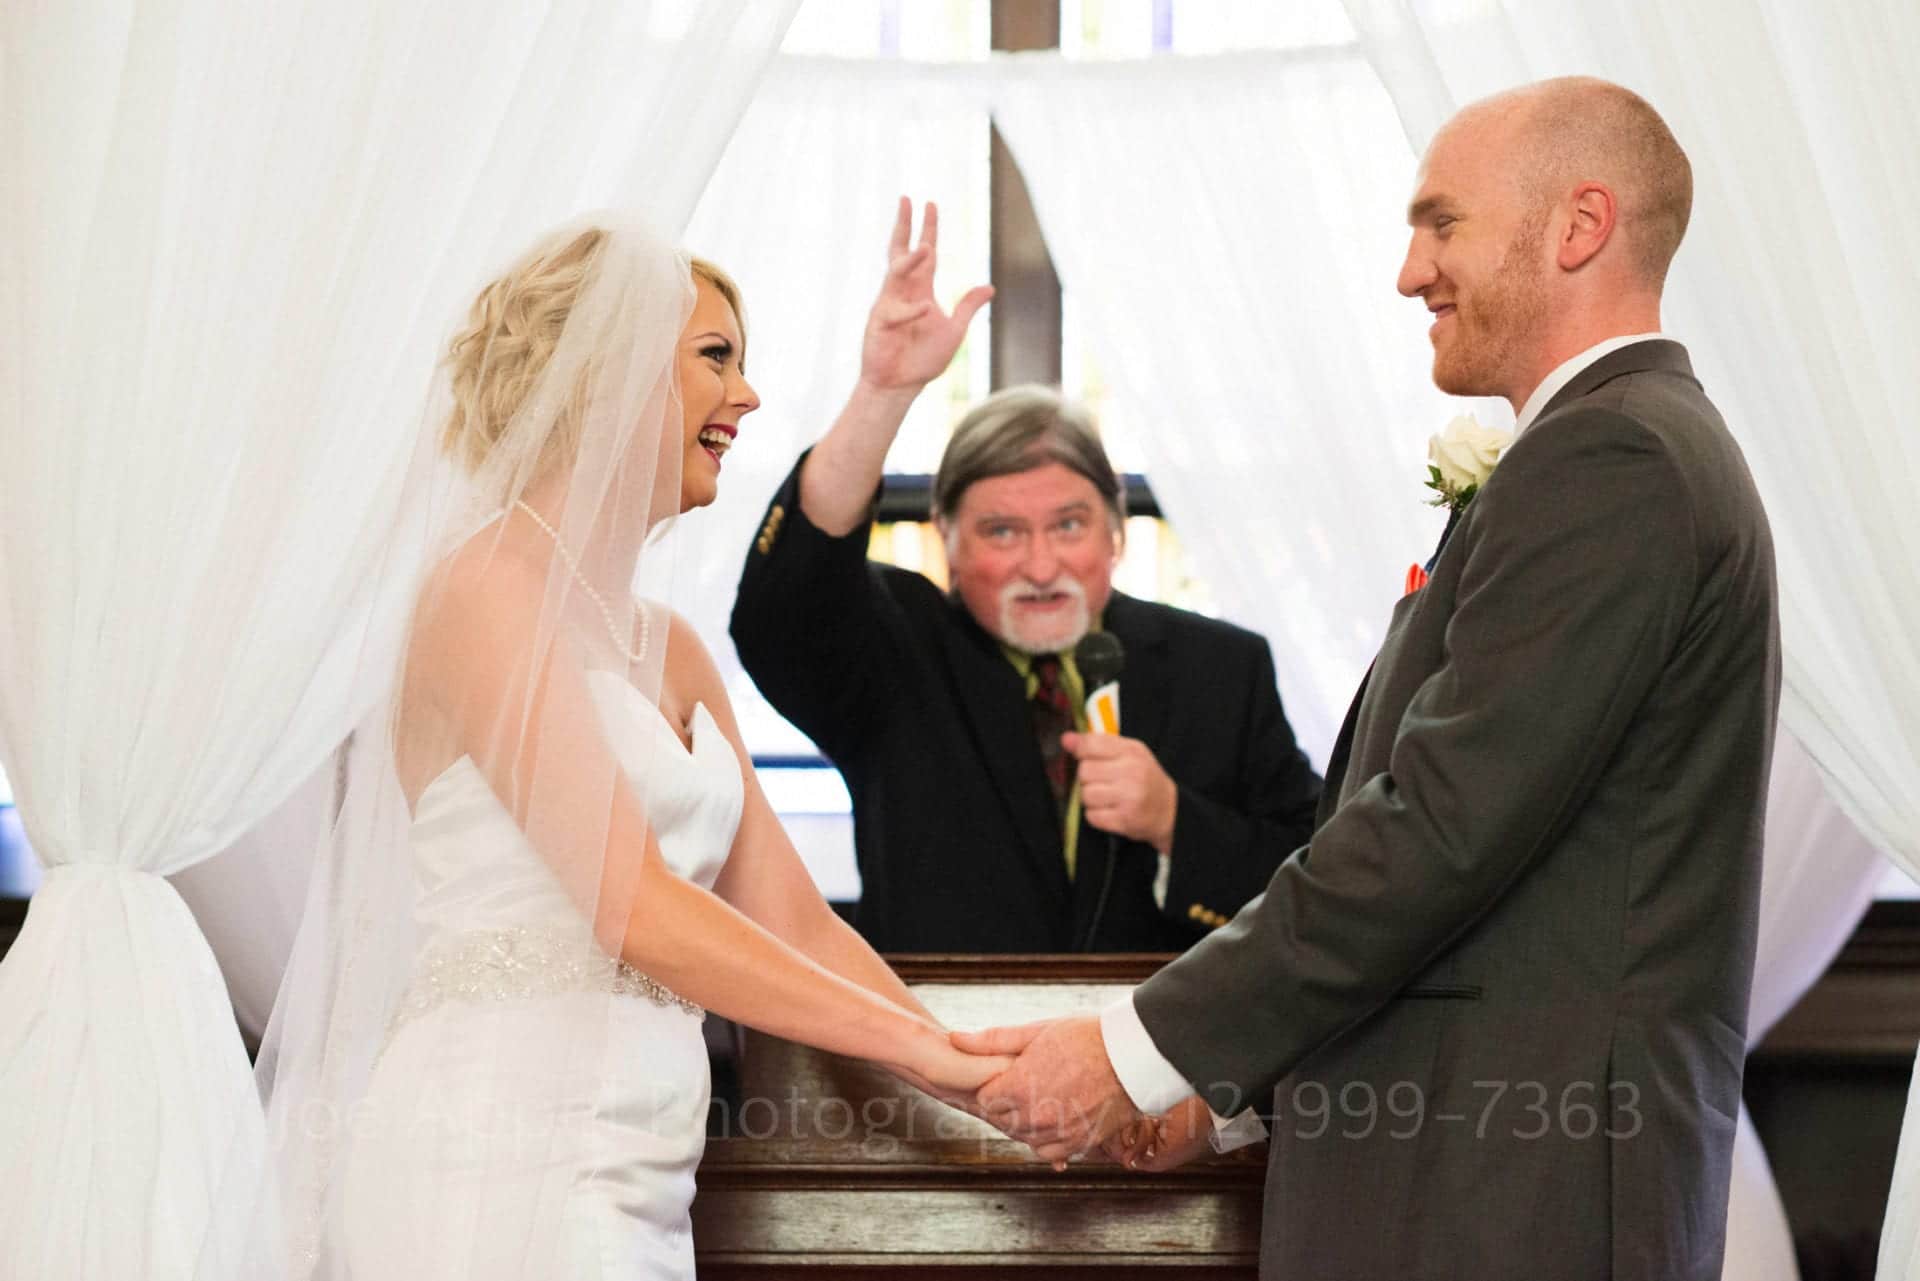 A bearded officiant raises his hand in a blessing between a bride and groom who smile and hold hands during a wedding at the Union Project in Highland Park.